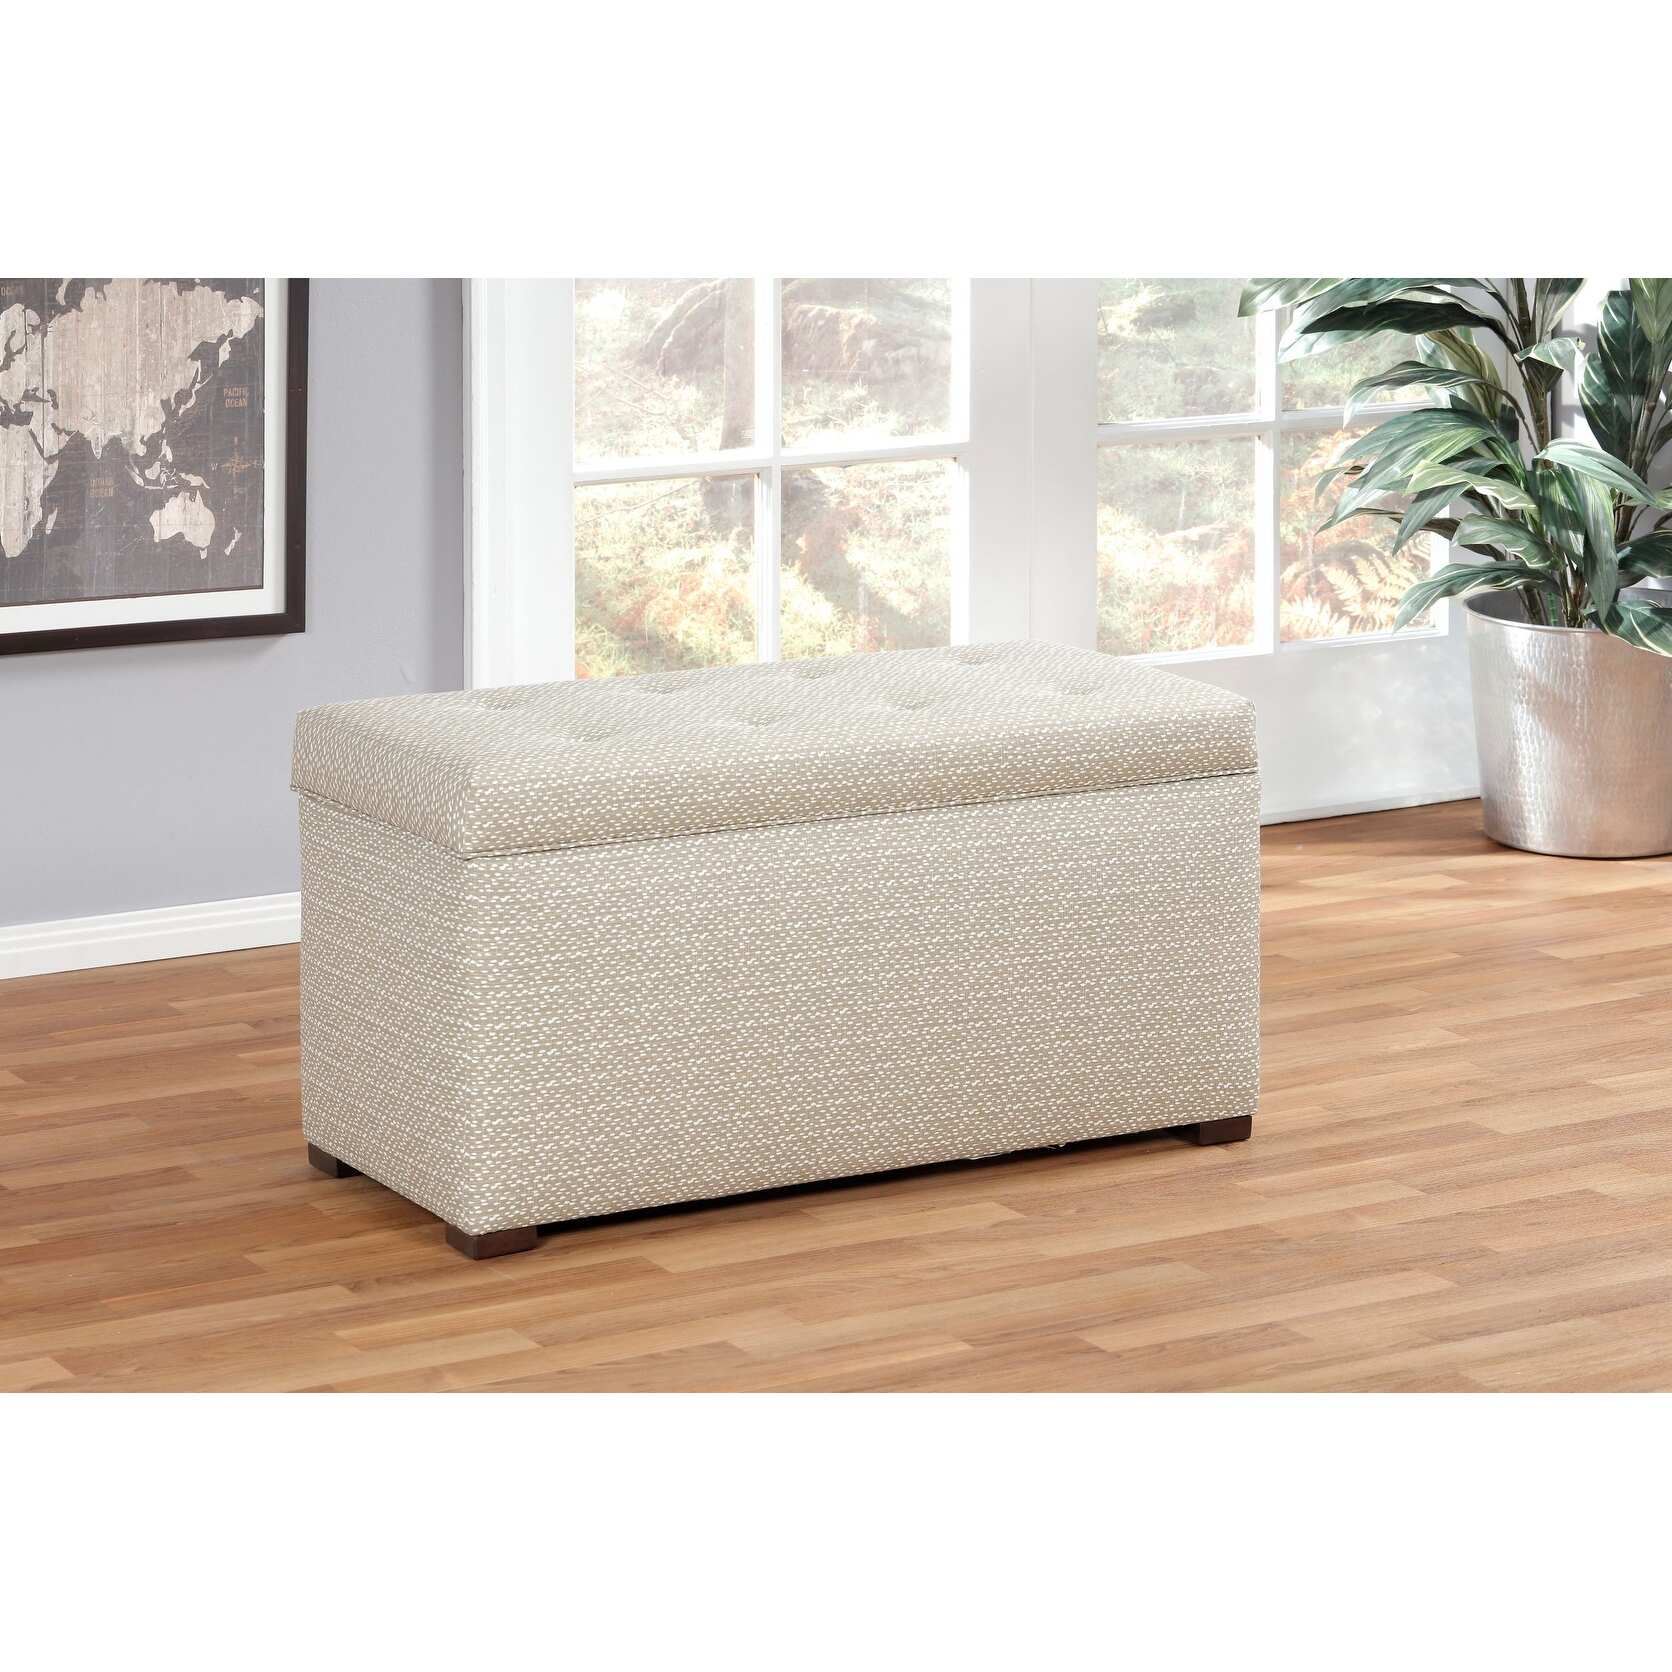 Angela by Sole Designs Upholstered Storage Ottoman Bench